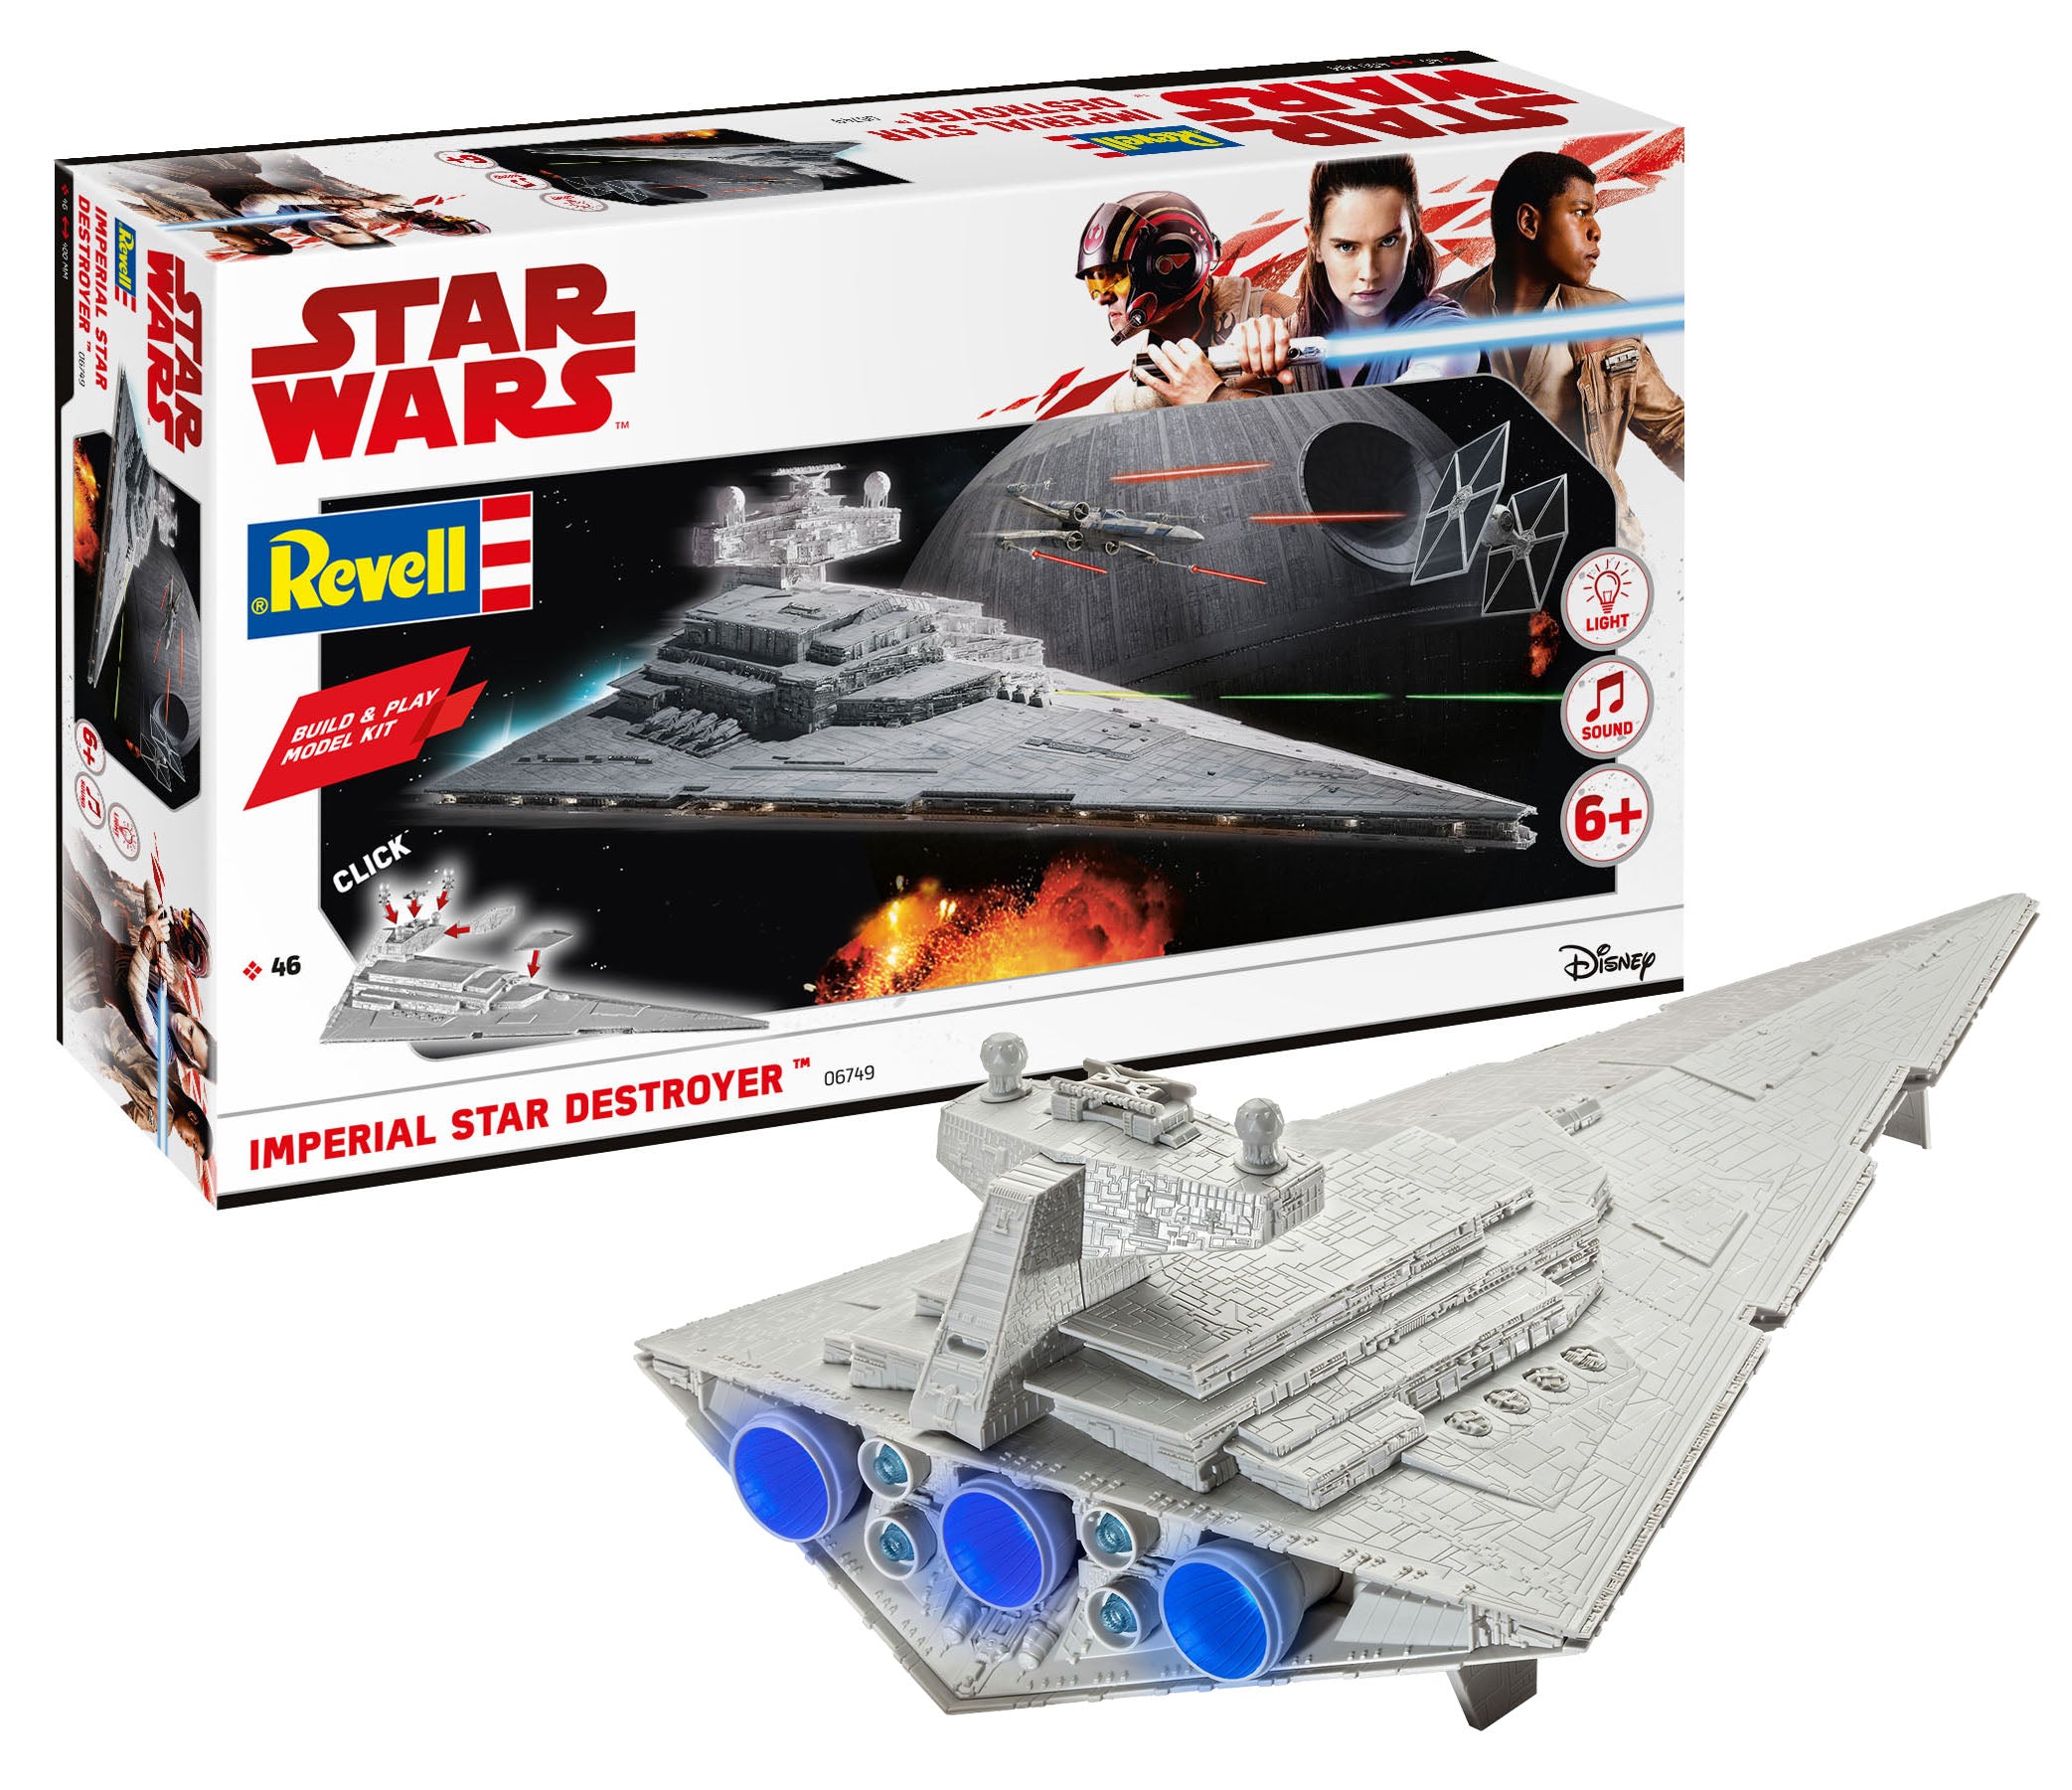 Spacecraft Model Kit Revell Imperial Star Destroyer Build & Play 1:4000